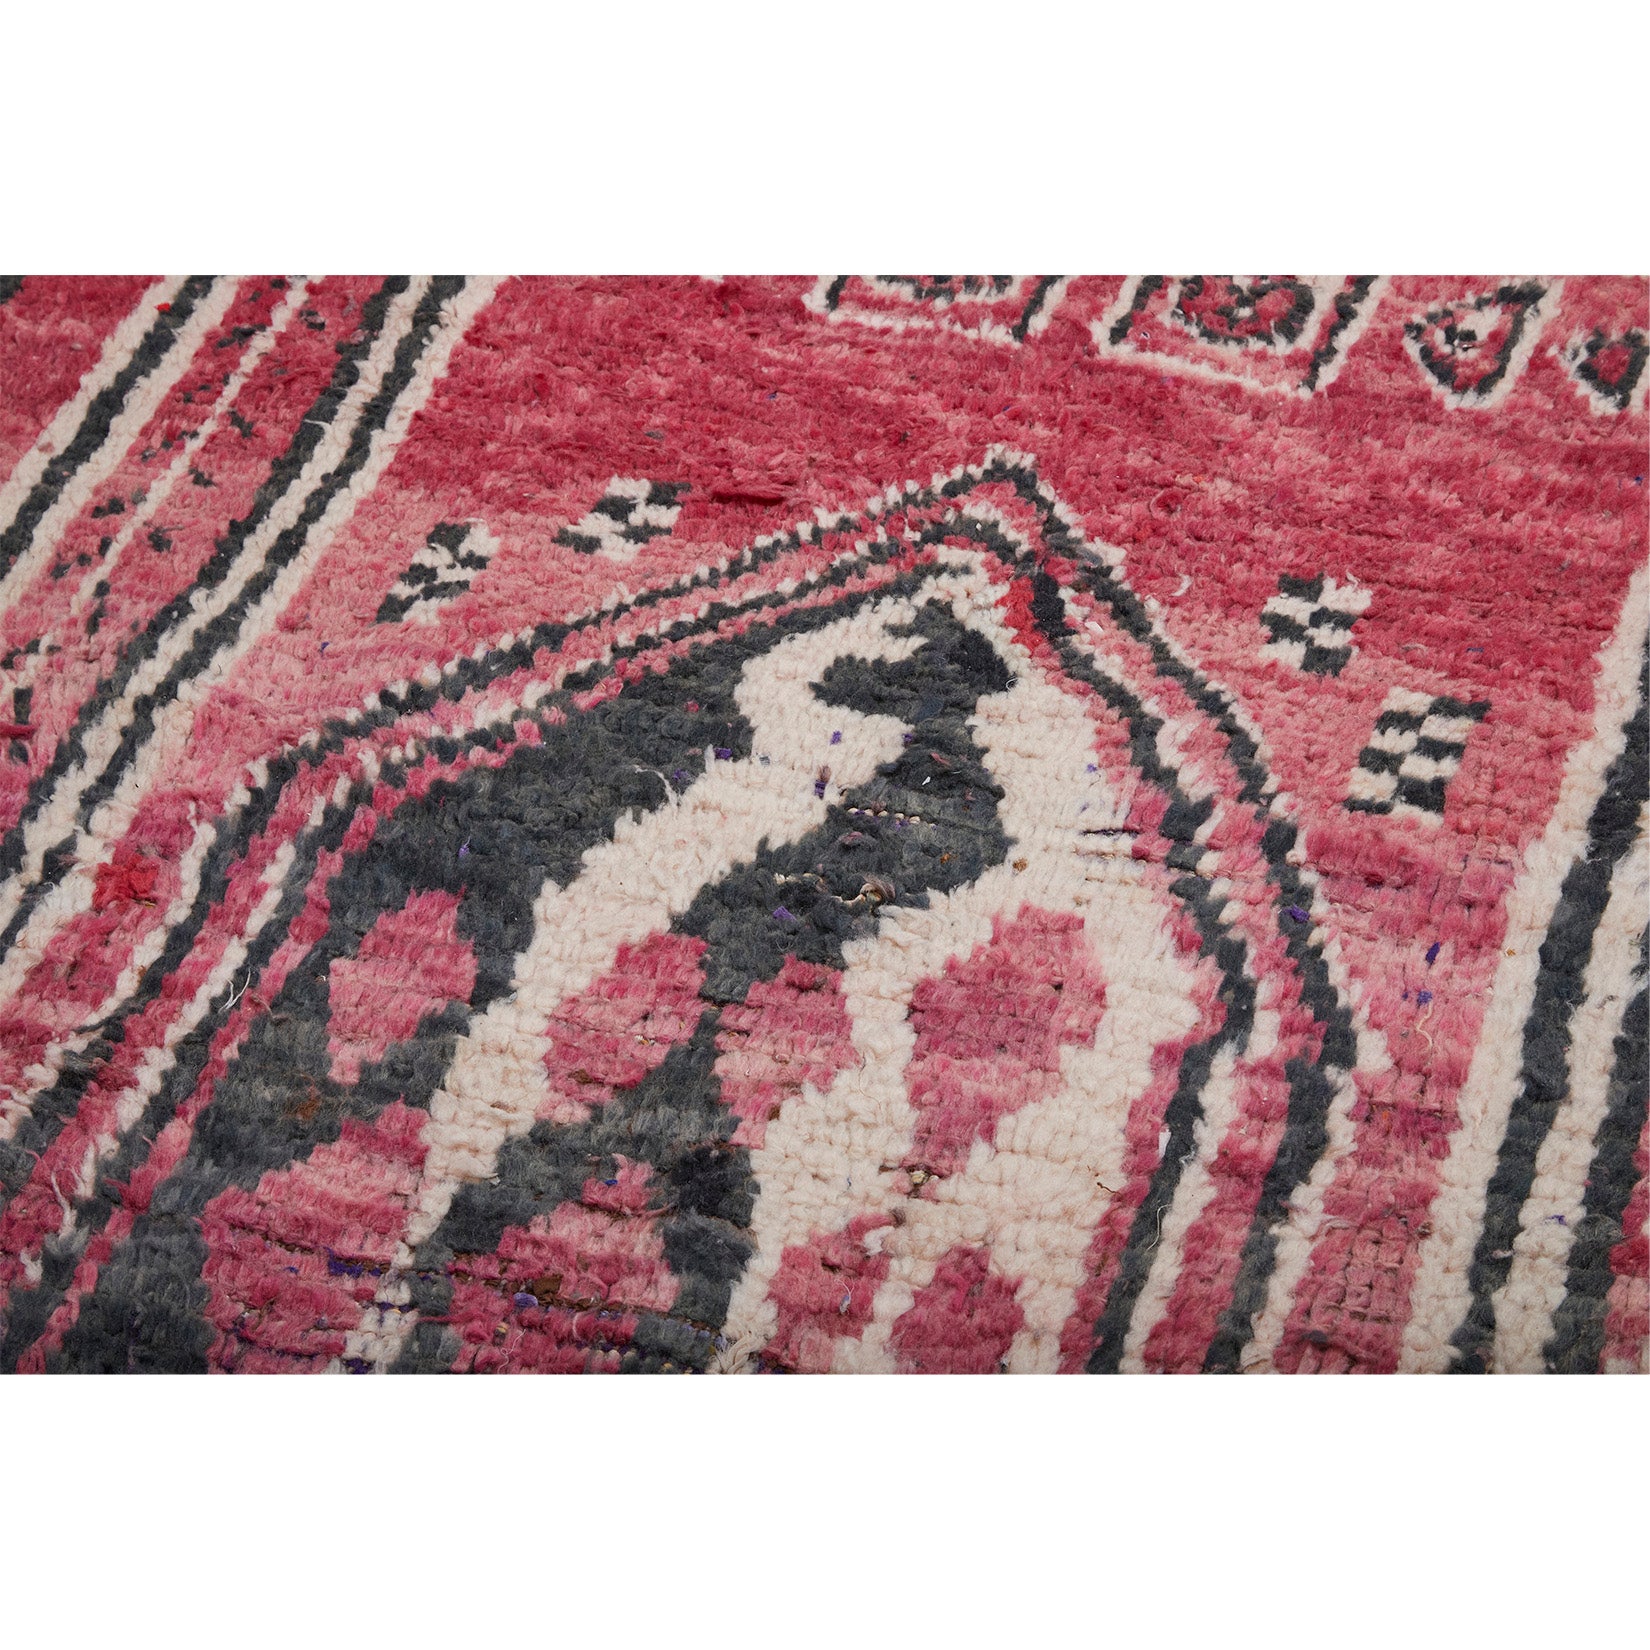 Red vintage Moroccan rug with black and white details - Kantara | Moroccan Rugs